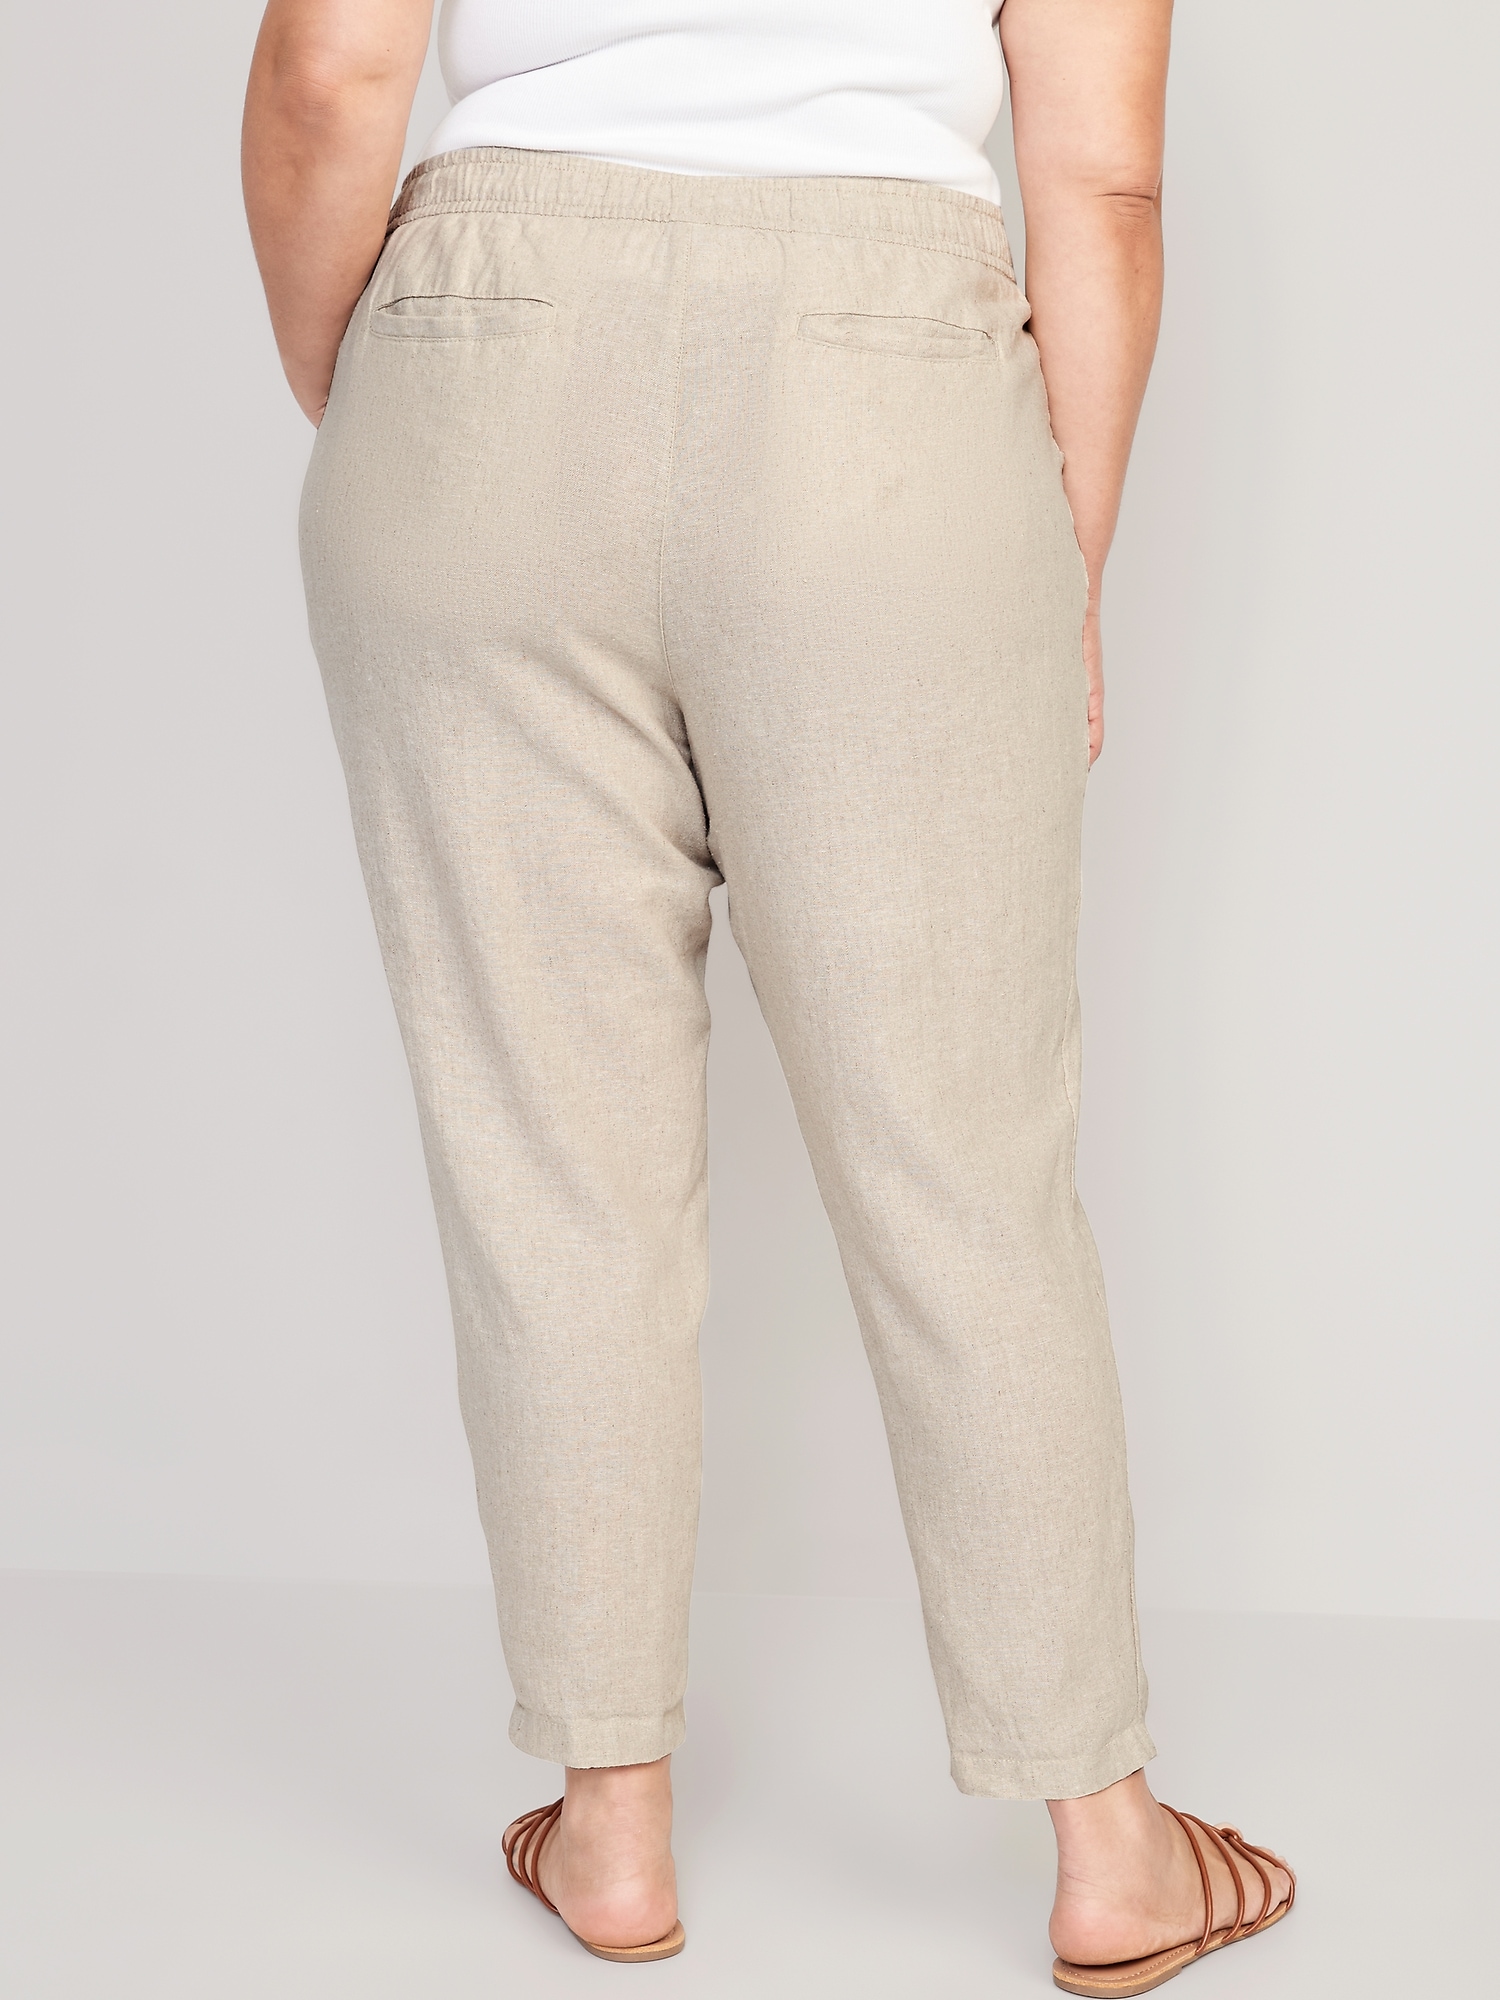 High-Waisted Linen-Blend Plus-Size Culotte Pants, Old Navy